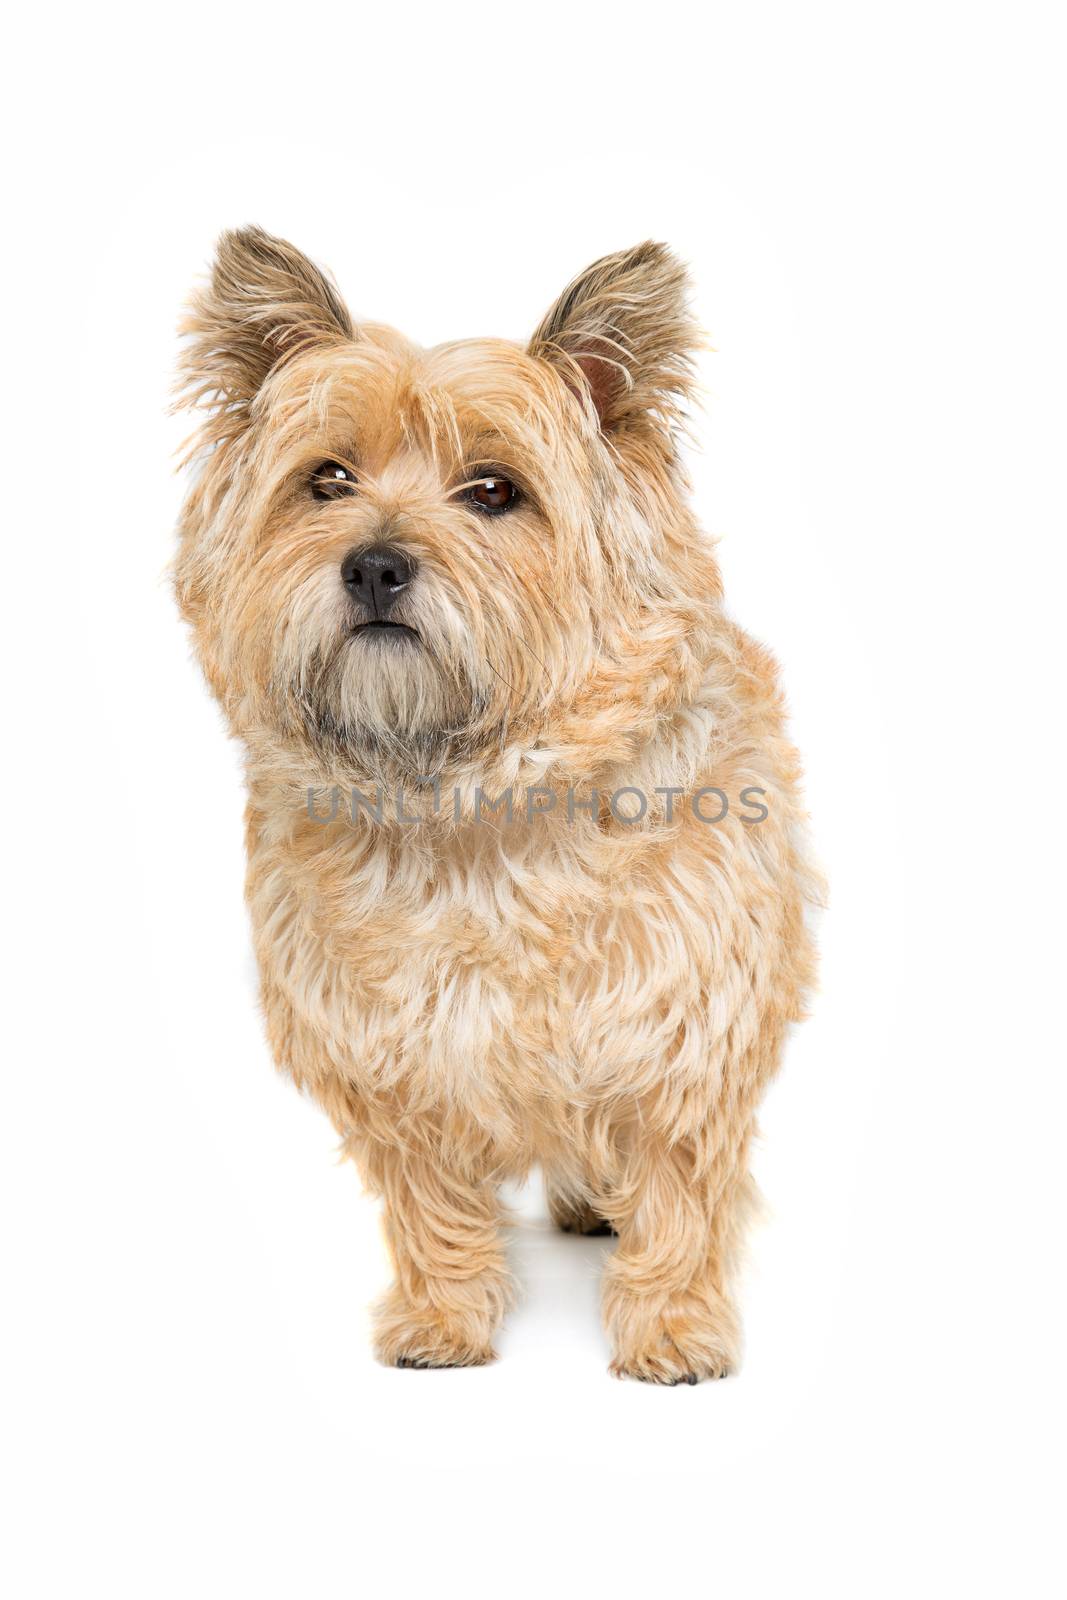 Cairn Terrier in front of a white background